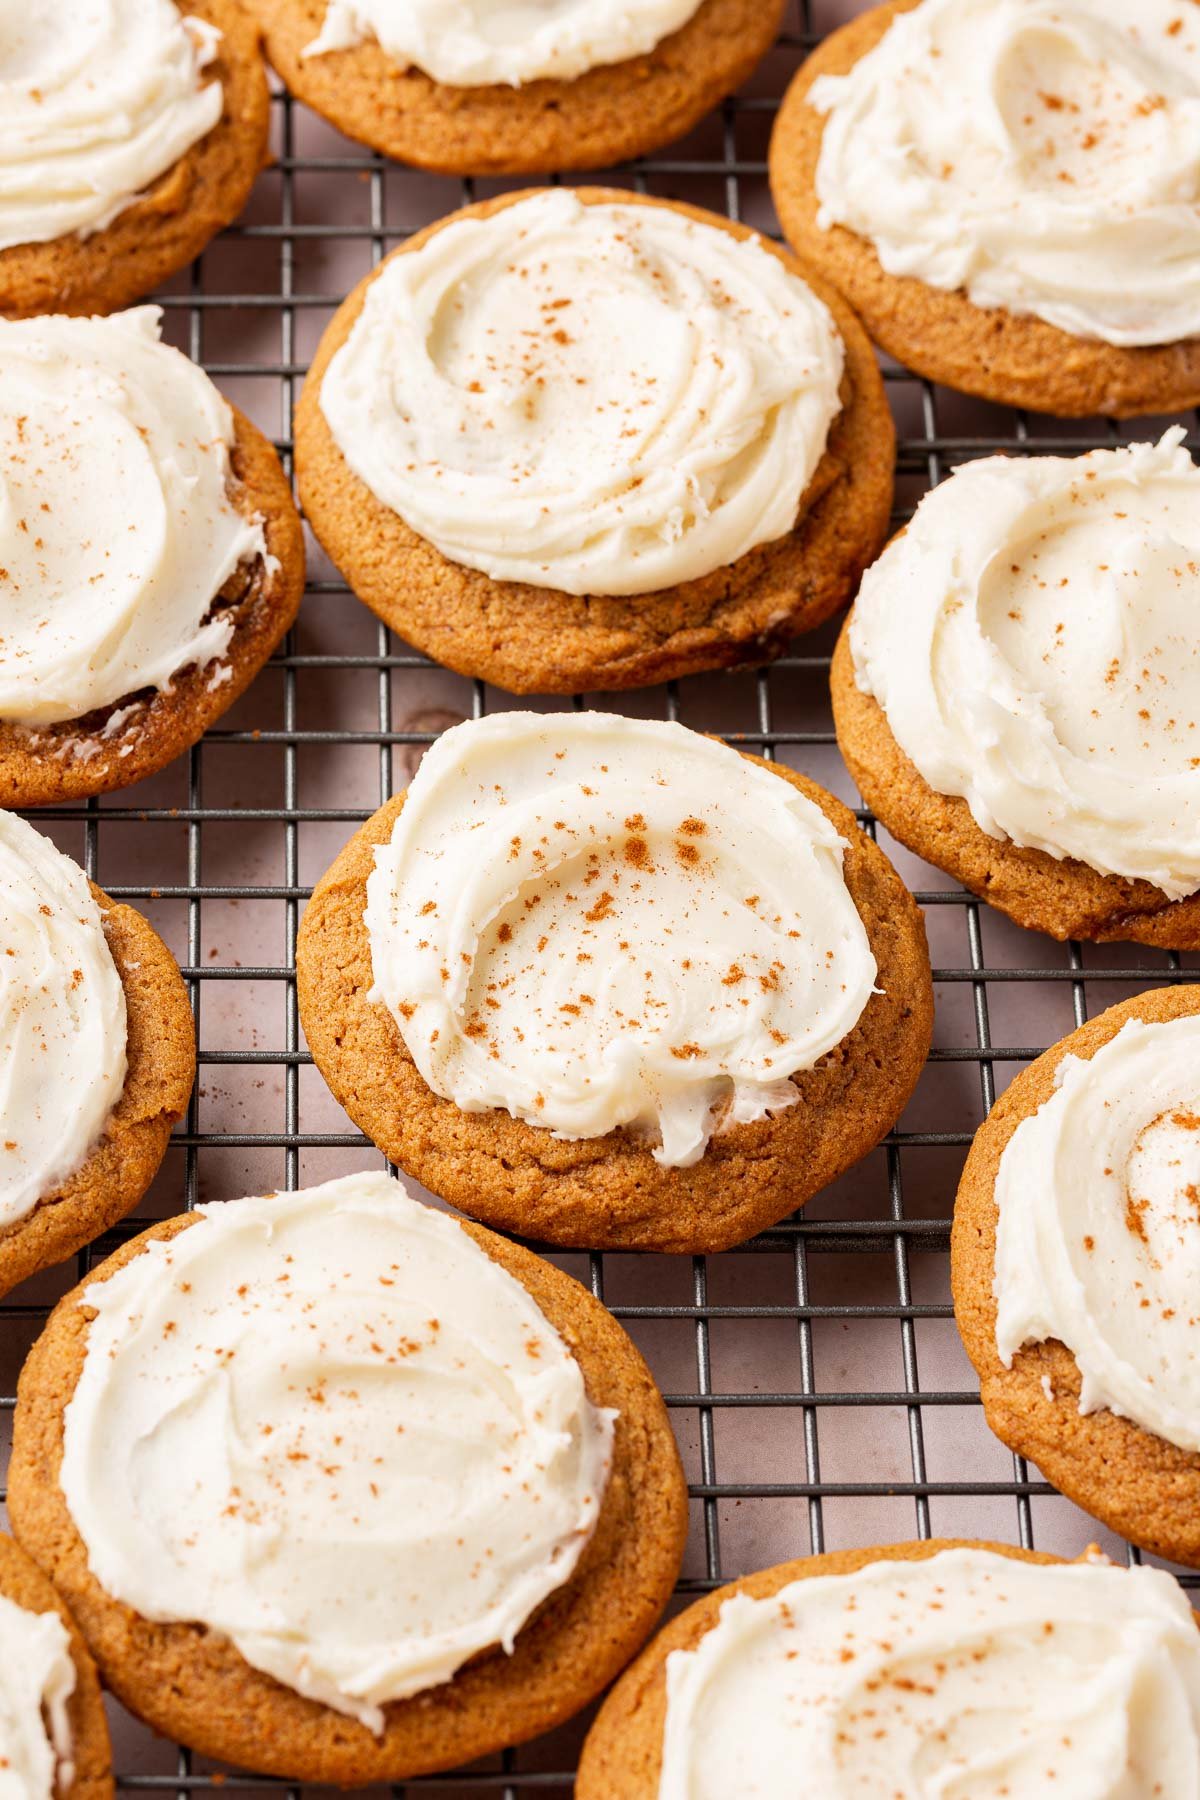 Gluten-free pumpkin cookies with cream cheese frosting on a wire cooling rack.